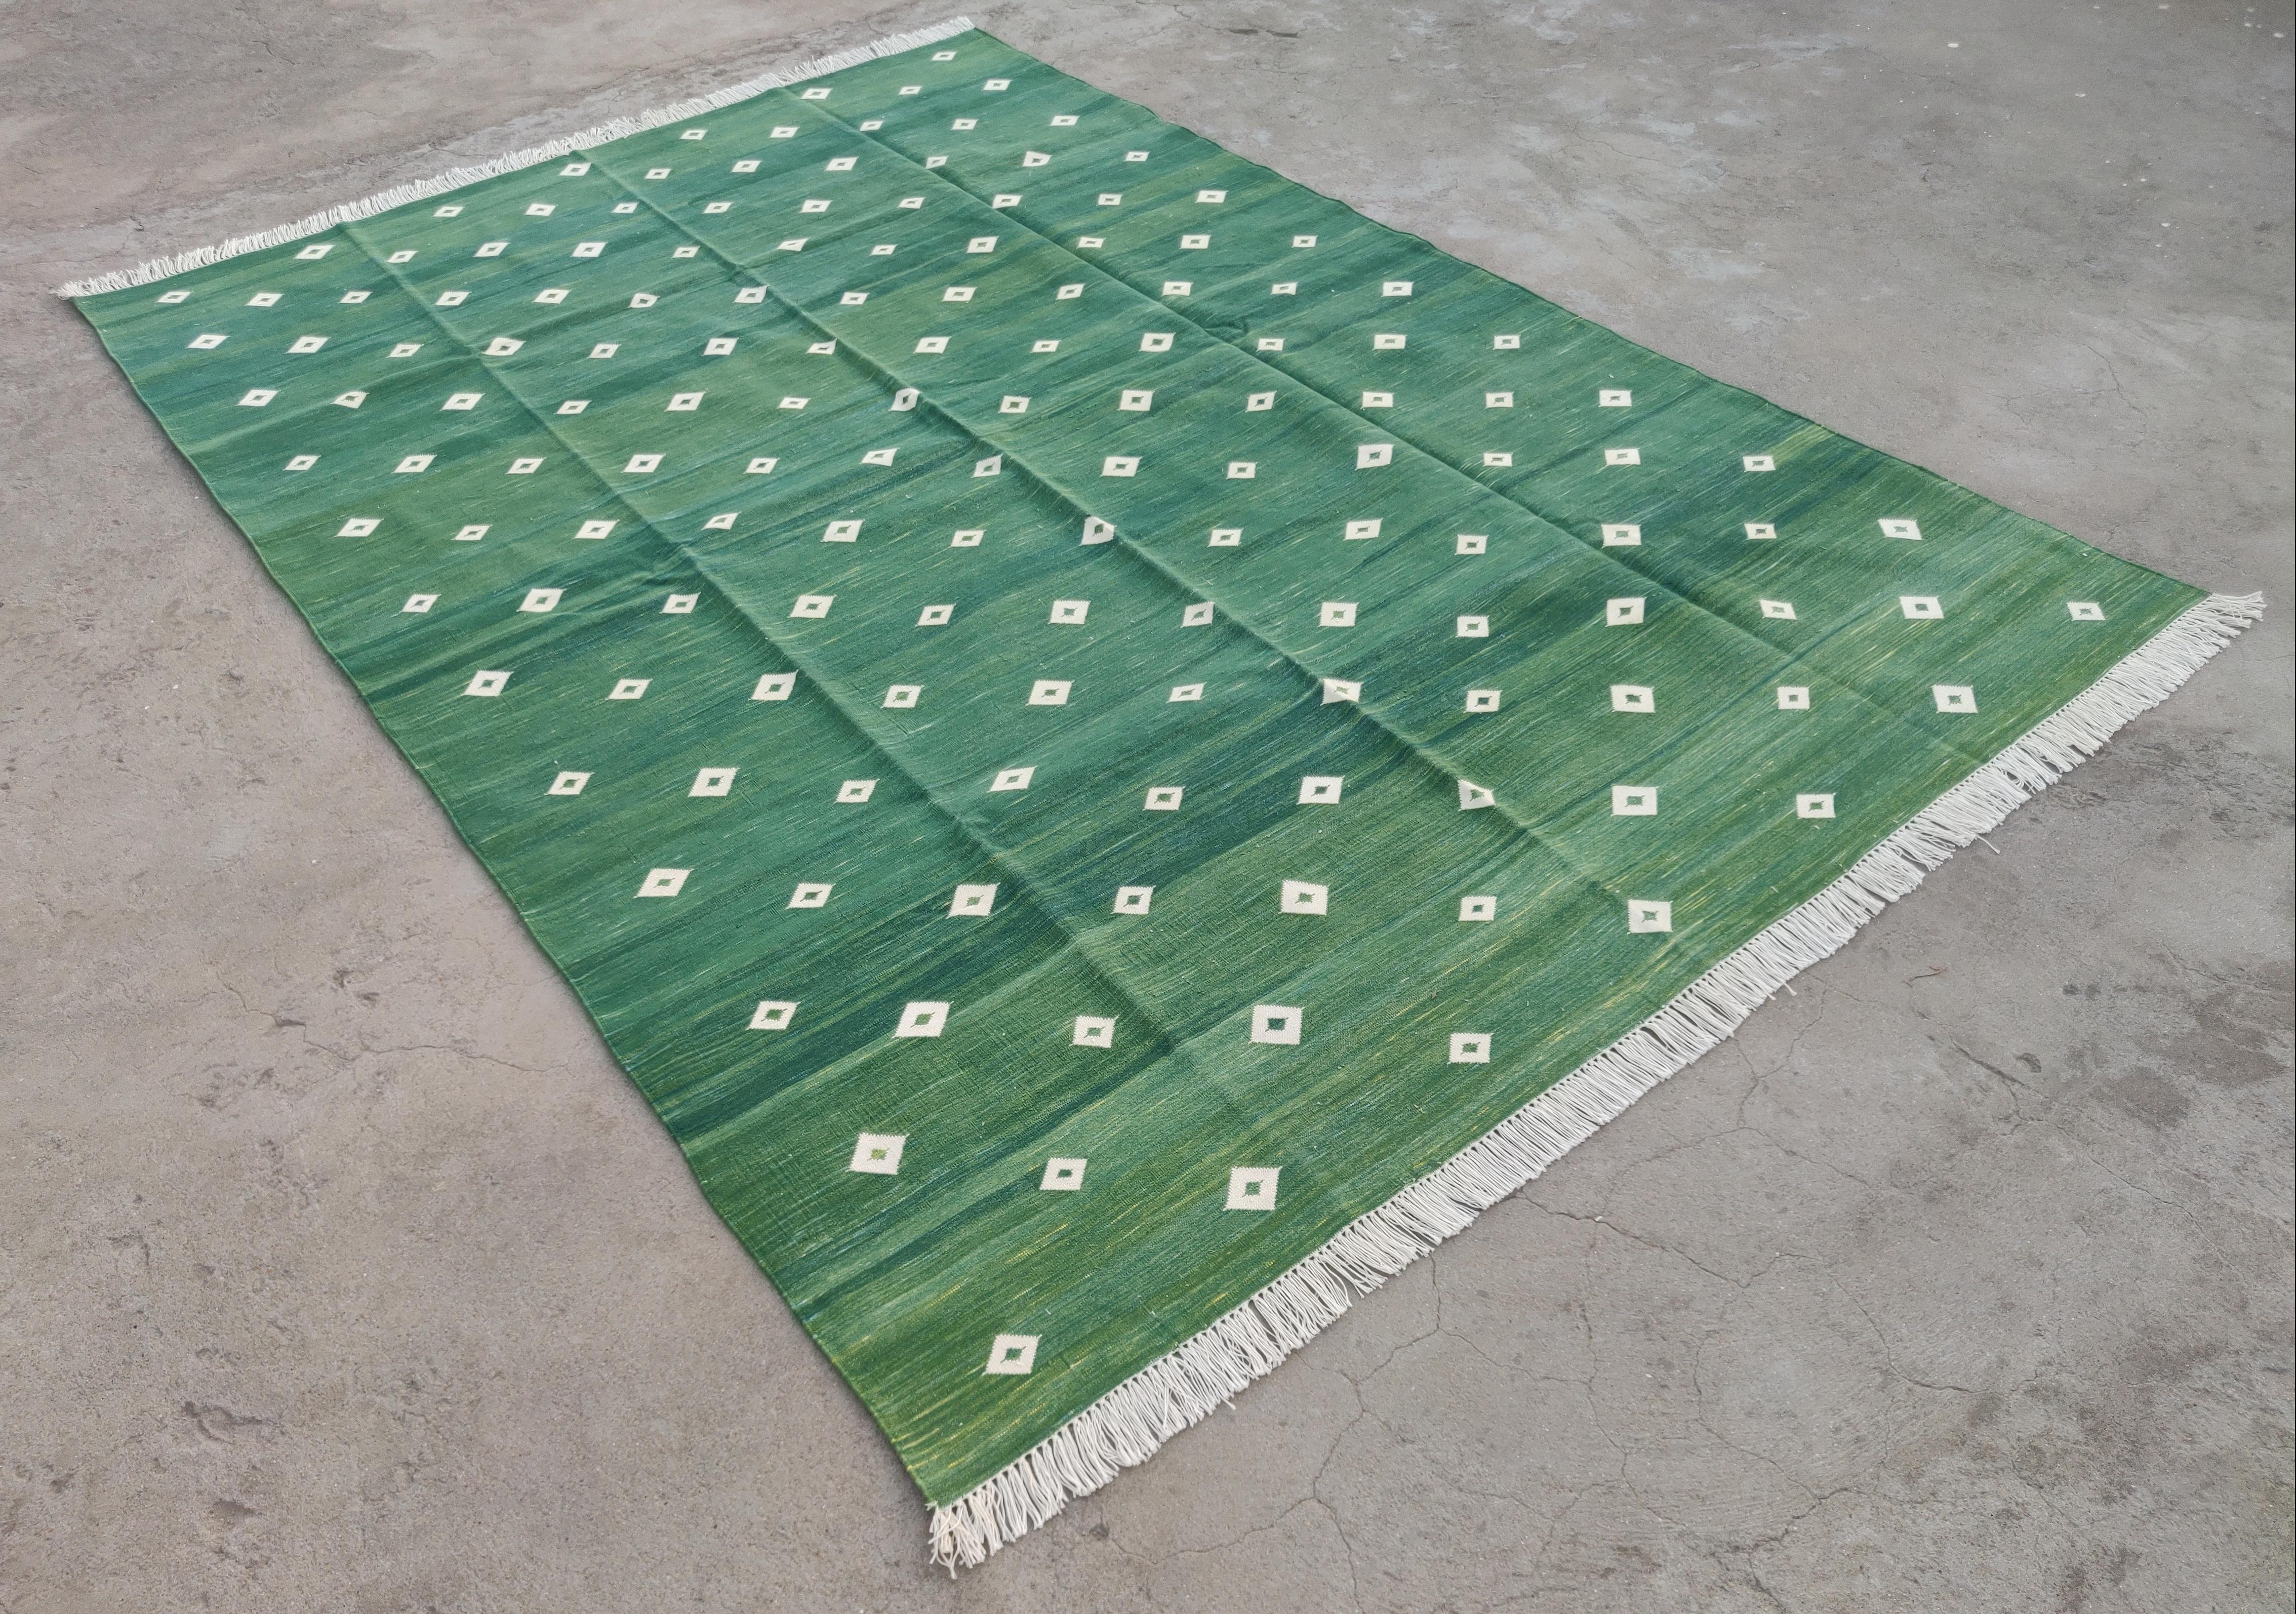 Handmade Cotton Natural Vegetable Dyed Rug, Forest Green And White Diamond Indian Dhurrie- 6'x9'
These special flat-weave dhurries are hand-woven with 15 ply 100% cotton yarn. Due to the special manufacturing techniques used to create our rugs, the